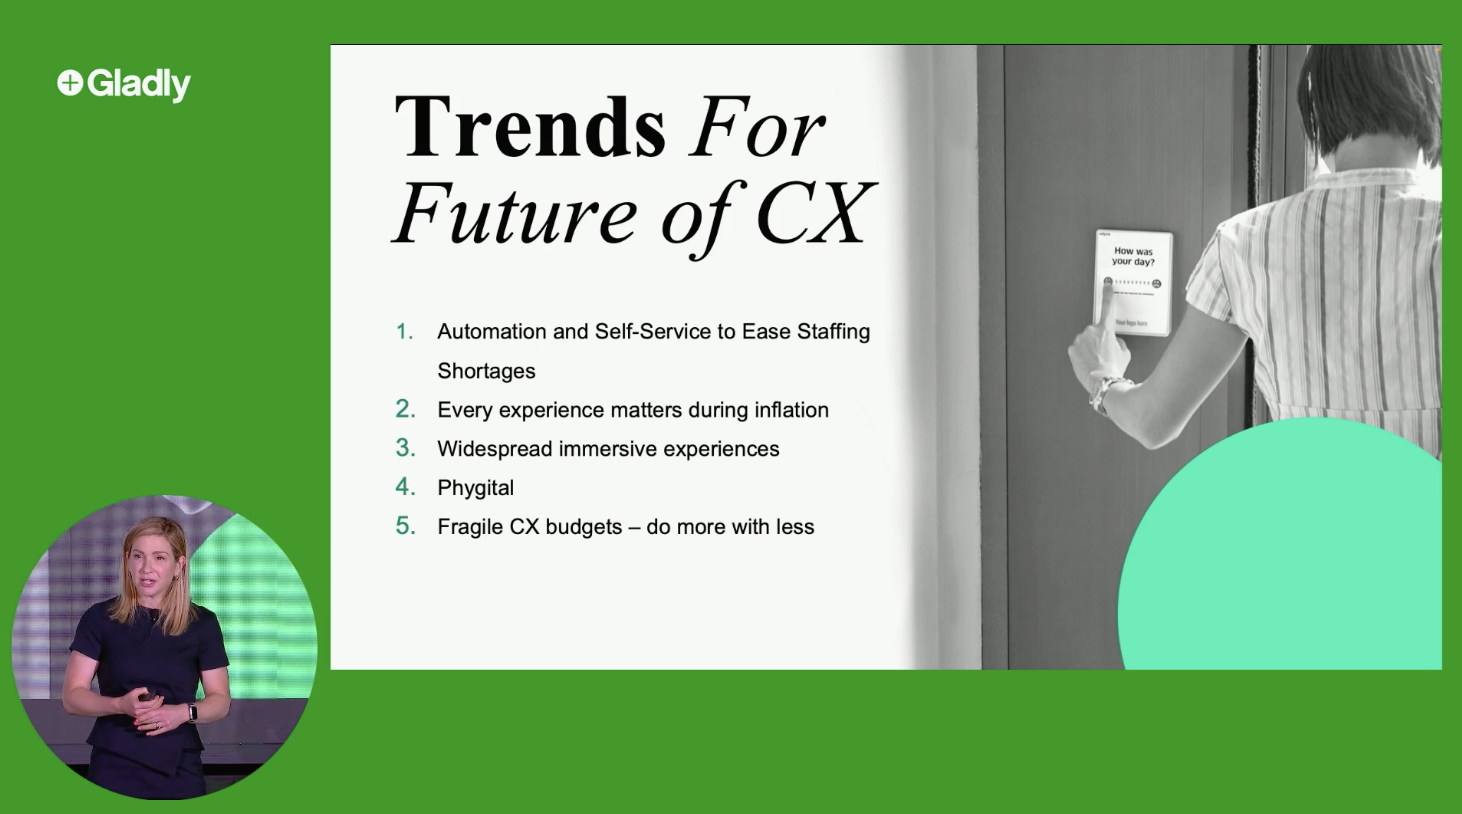 Blake Morgan taking the stage to discuss CX trends